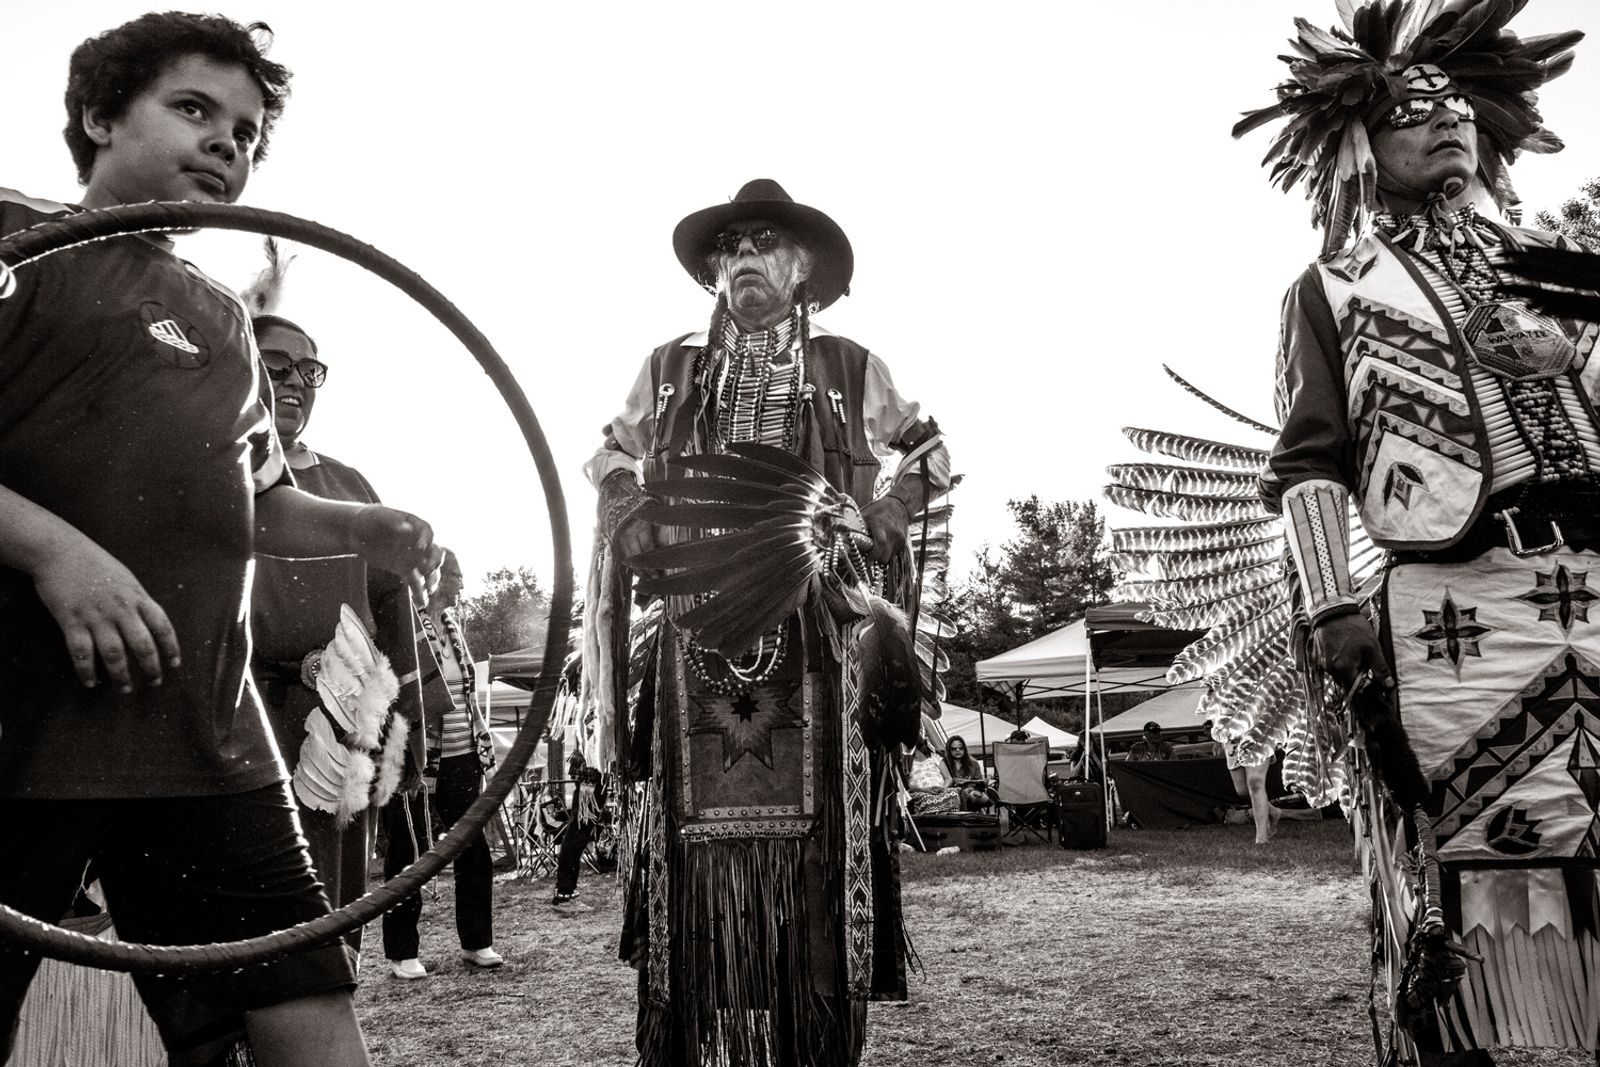 © David Trattles - Image from the Kitigan Zibi Traditional Powwow photography project